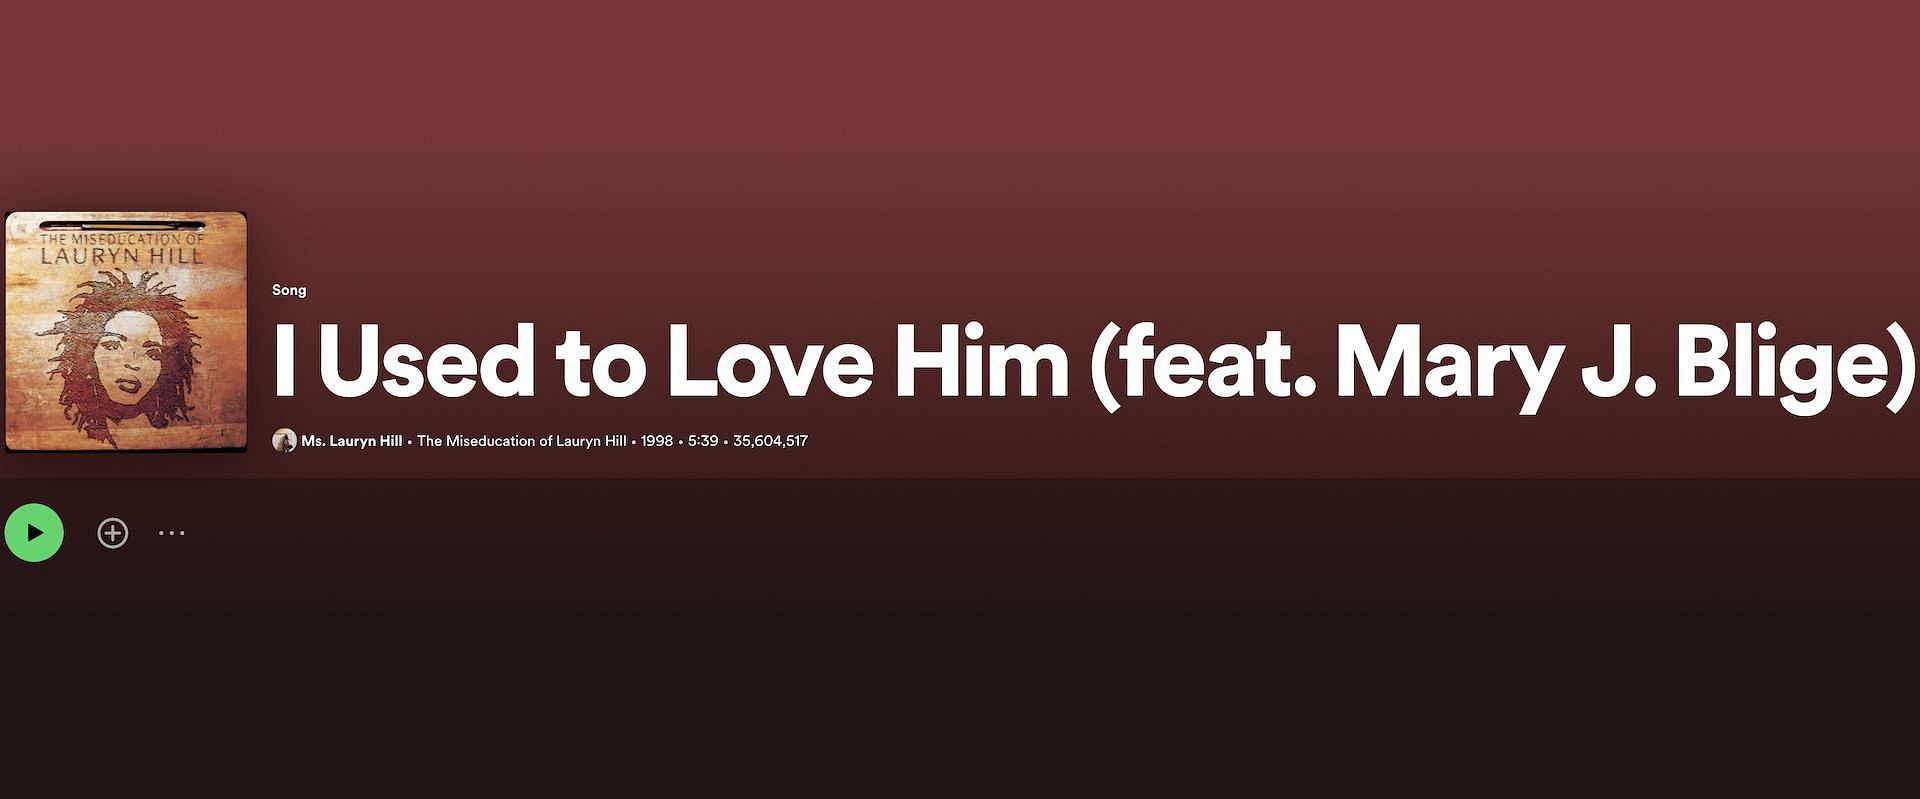 Track 9 of Lauryn&#039;s debut album &#039;The Miseducation of Lauryn Hill&#039; (Image via Spotify)